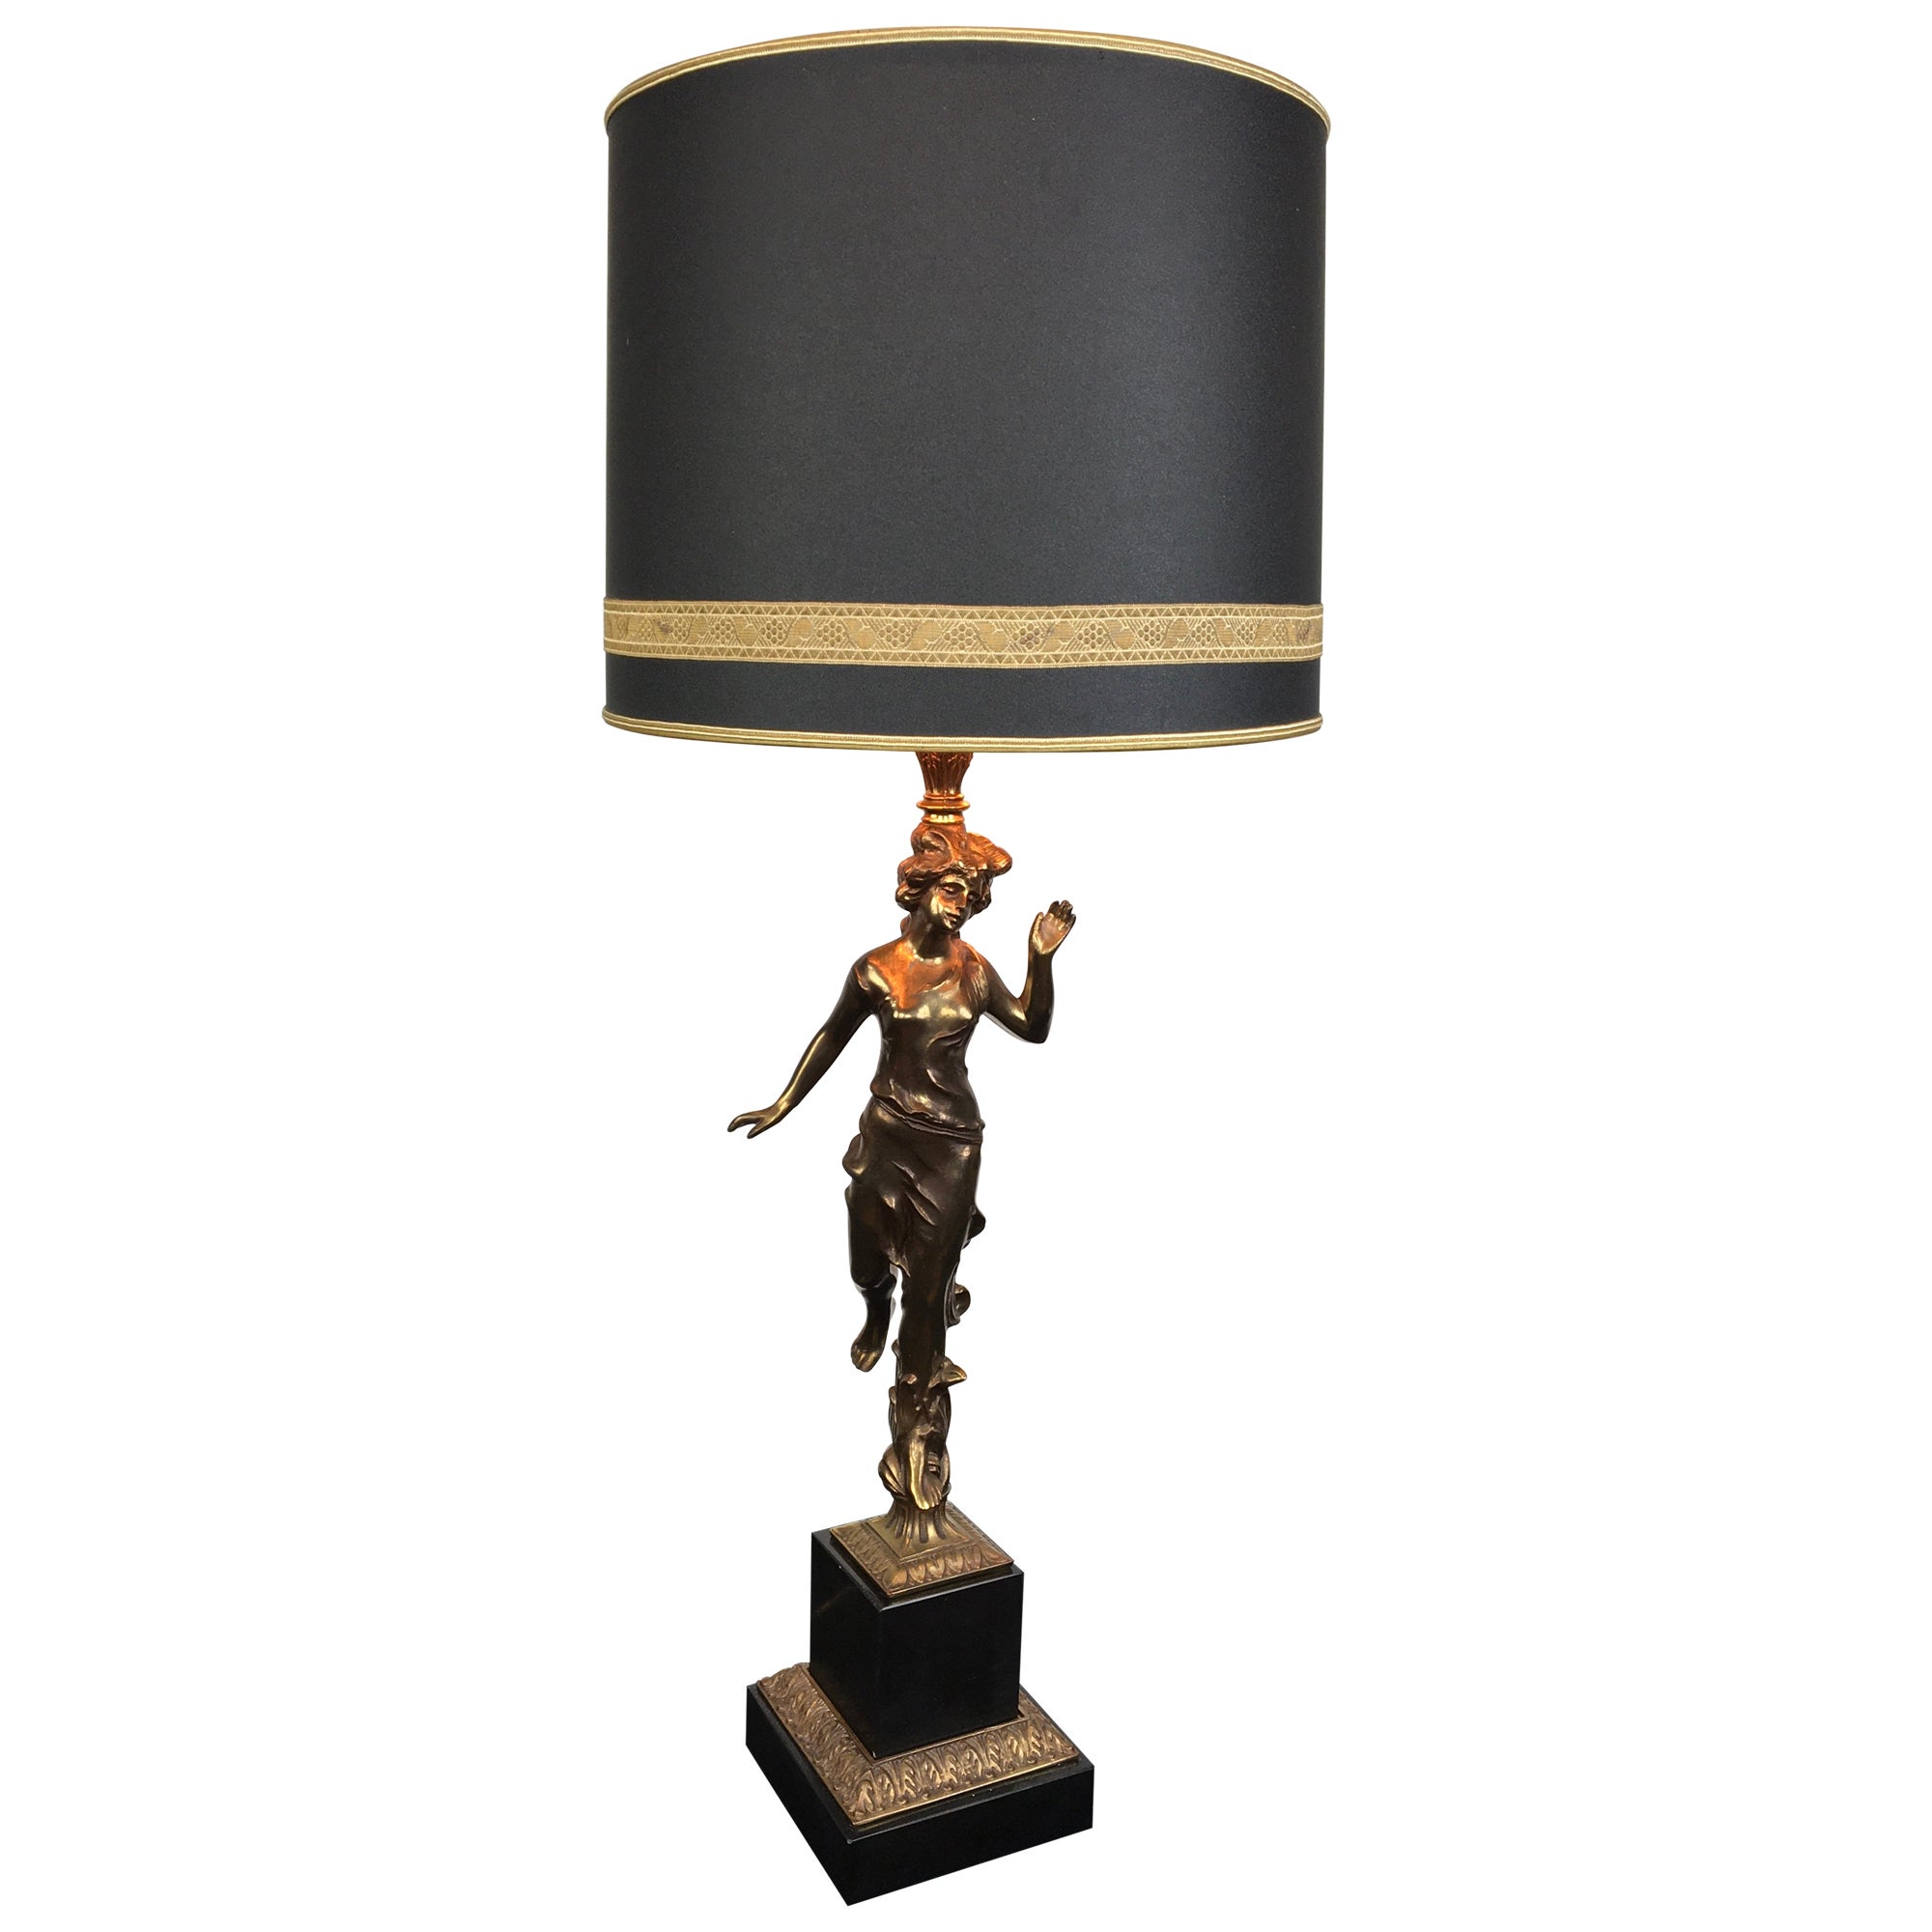 Large Figural Lady Table Lamp by Deknudt